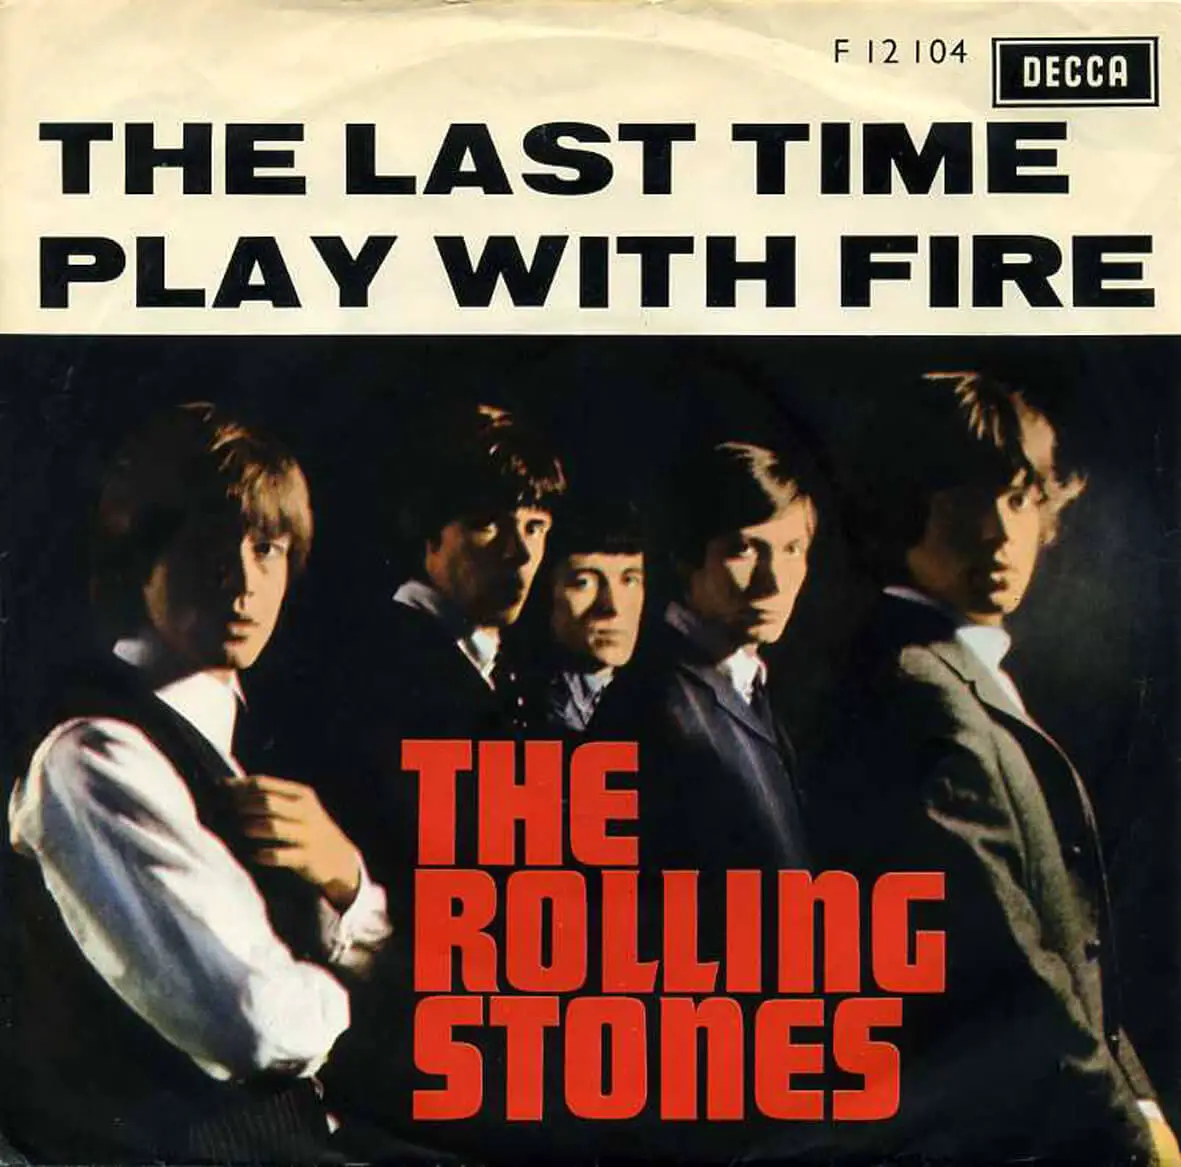 Play stones. Роллинг стоунз Play with Fire. Playing with Fire обложка. Rolling Stones игра. Роллинг стоунз игра с огнем.